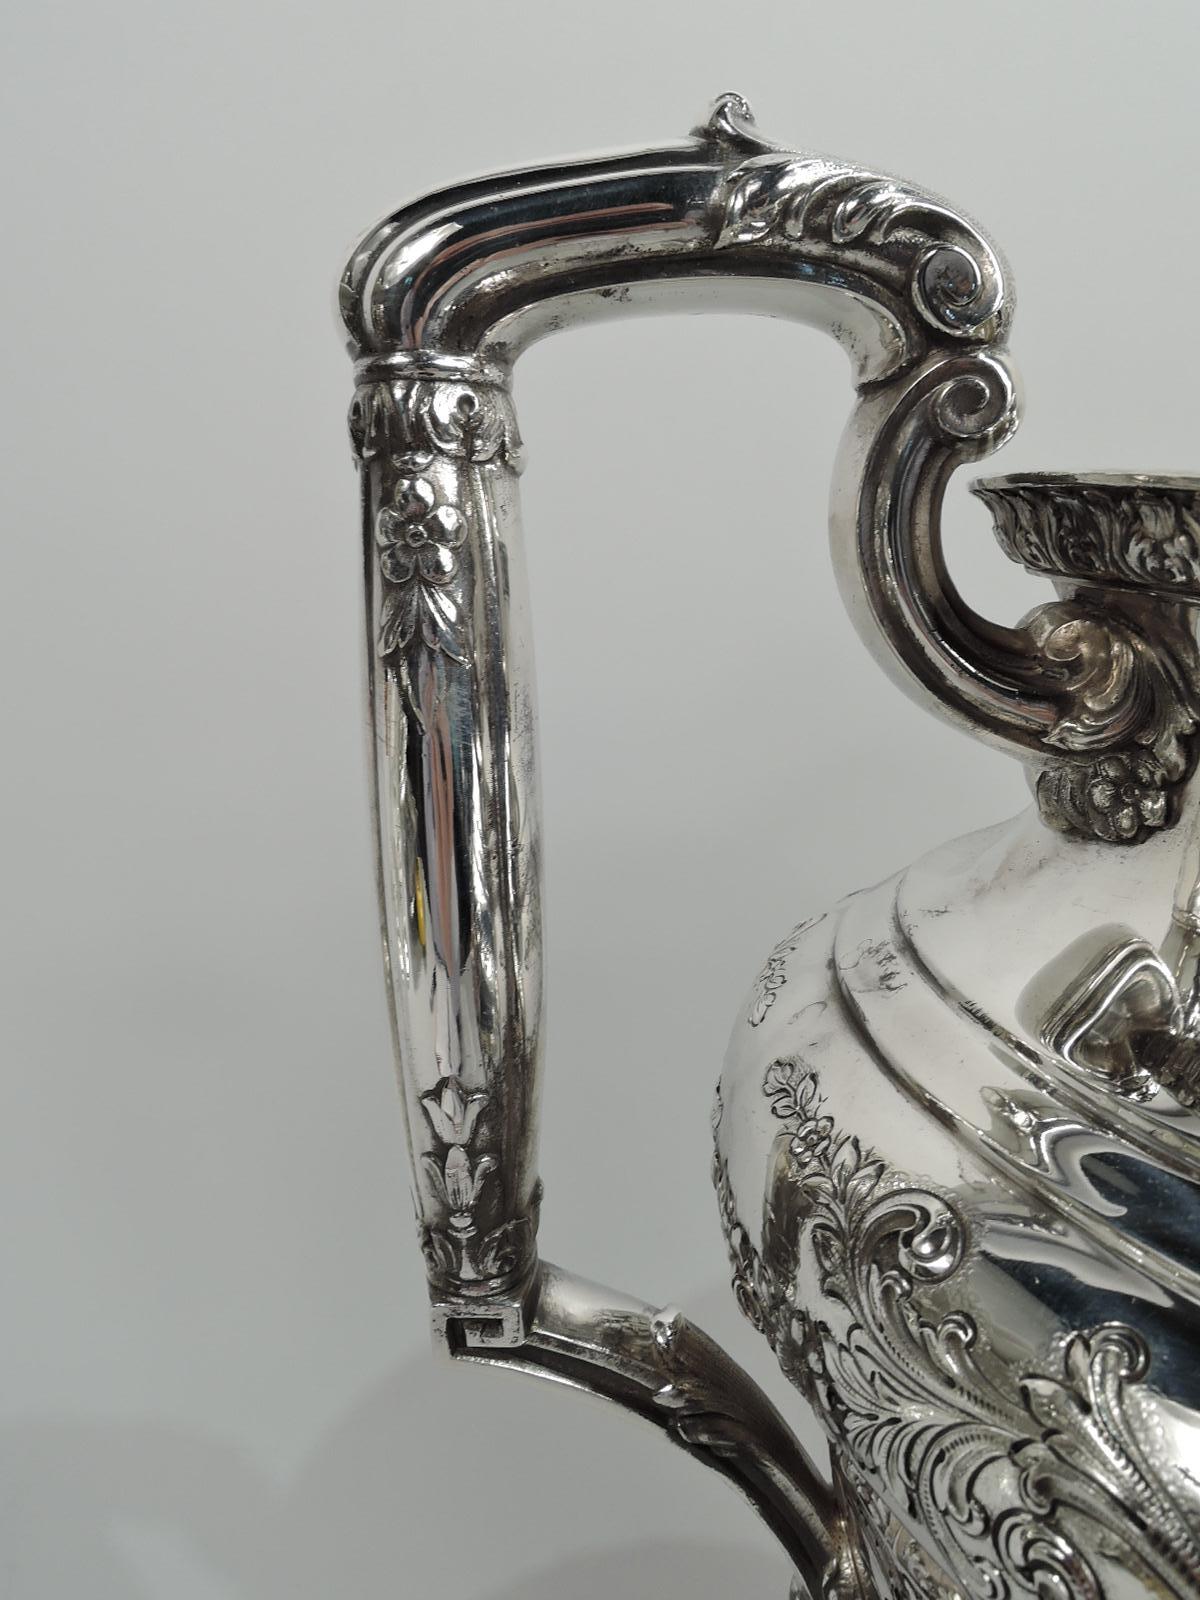 20th Century International Marie Antoinette Sumptuous Sterling Silver Water Pitcher